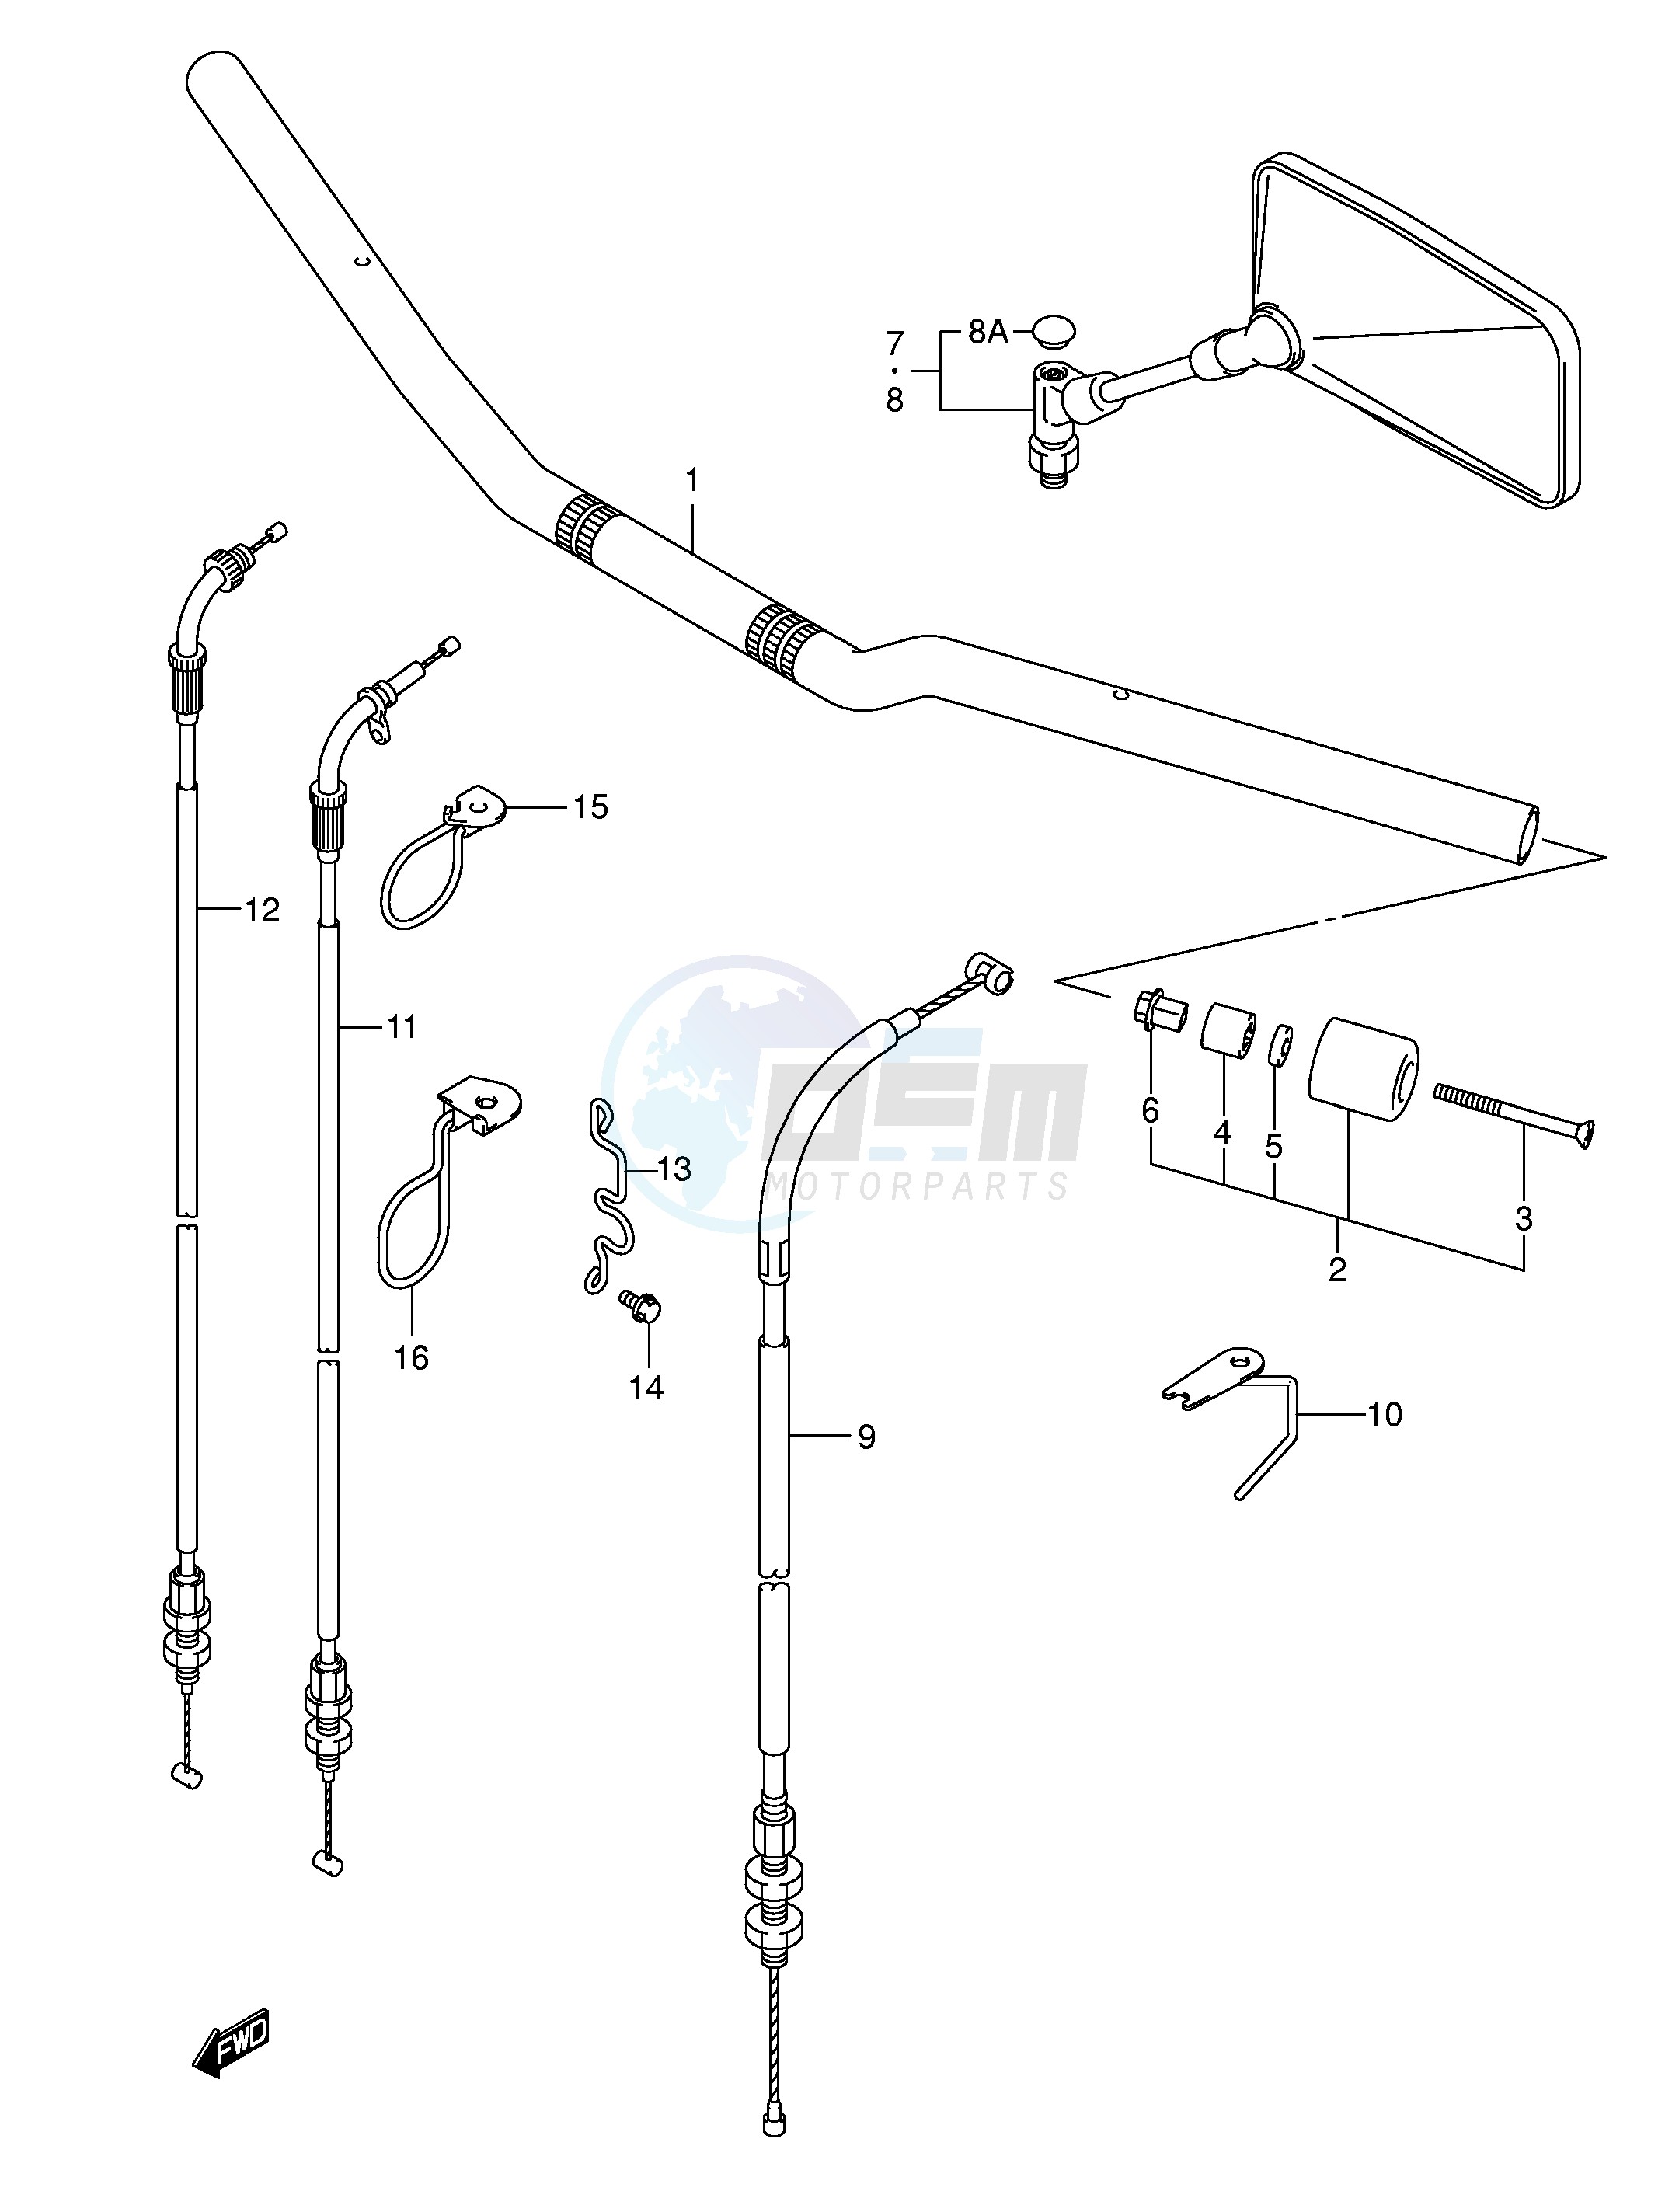 HANDLEBAR (WITH OUT COWLING) blueprint